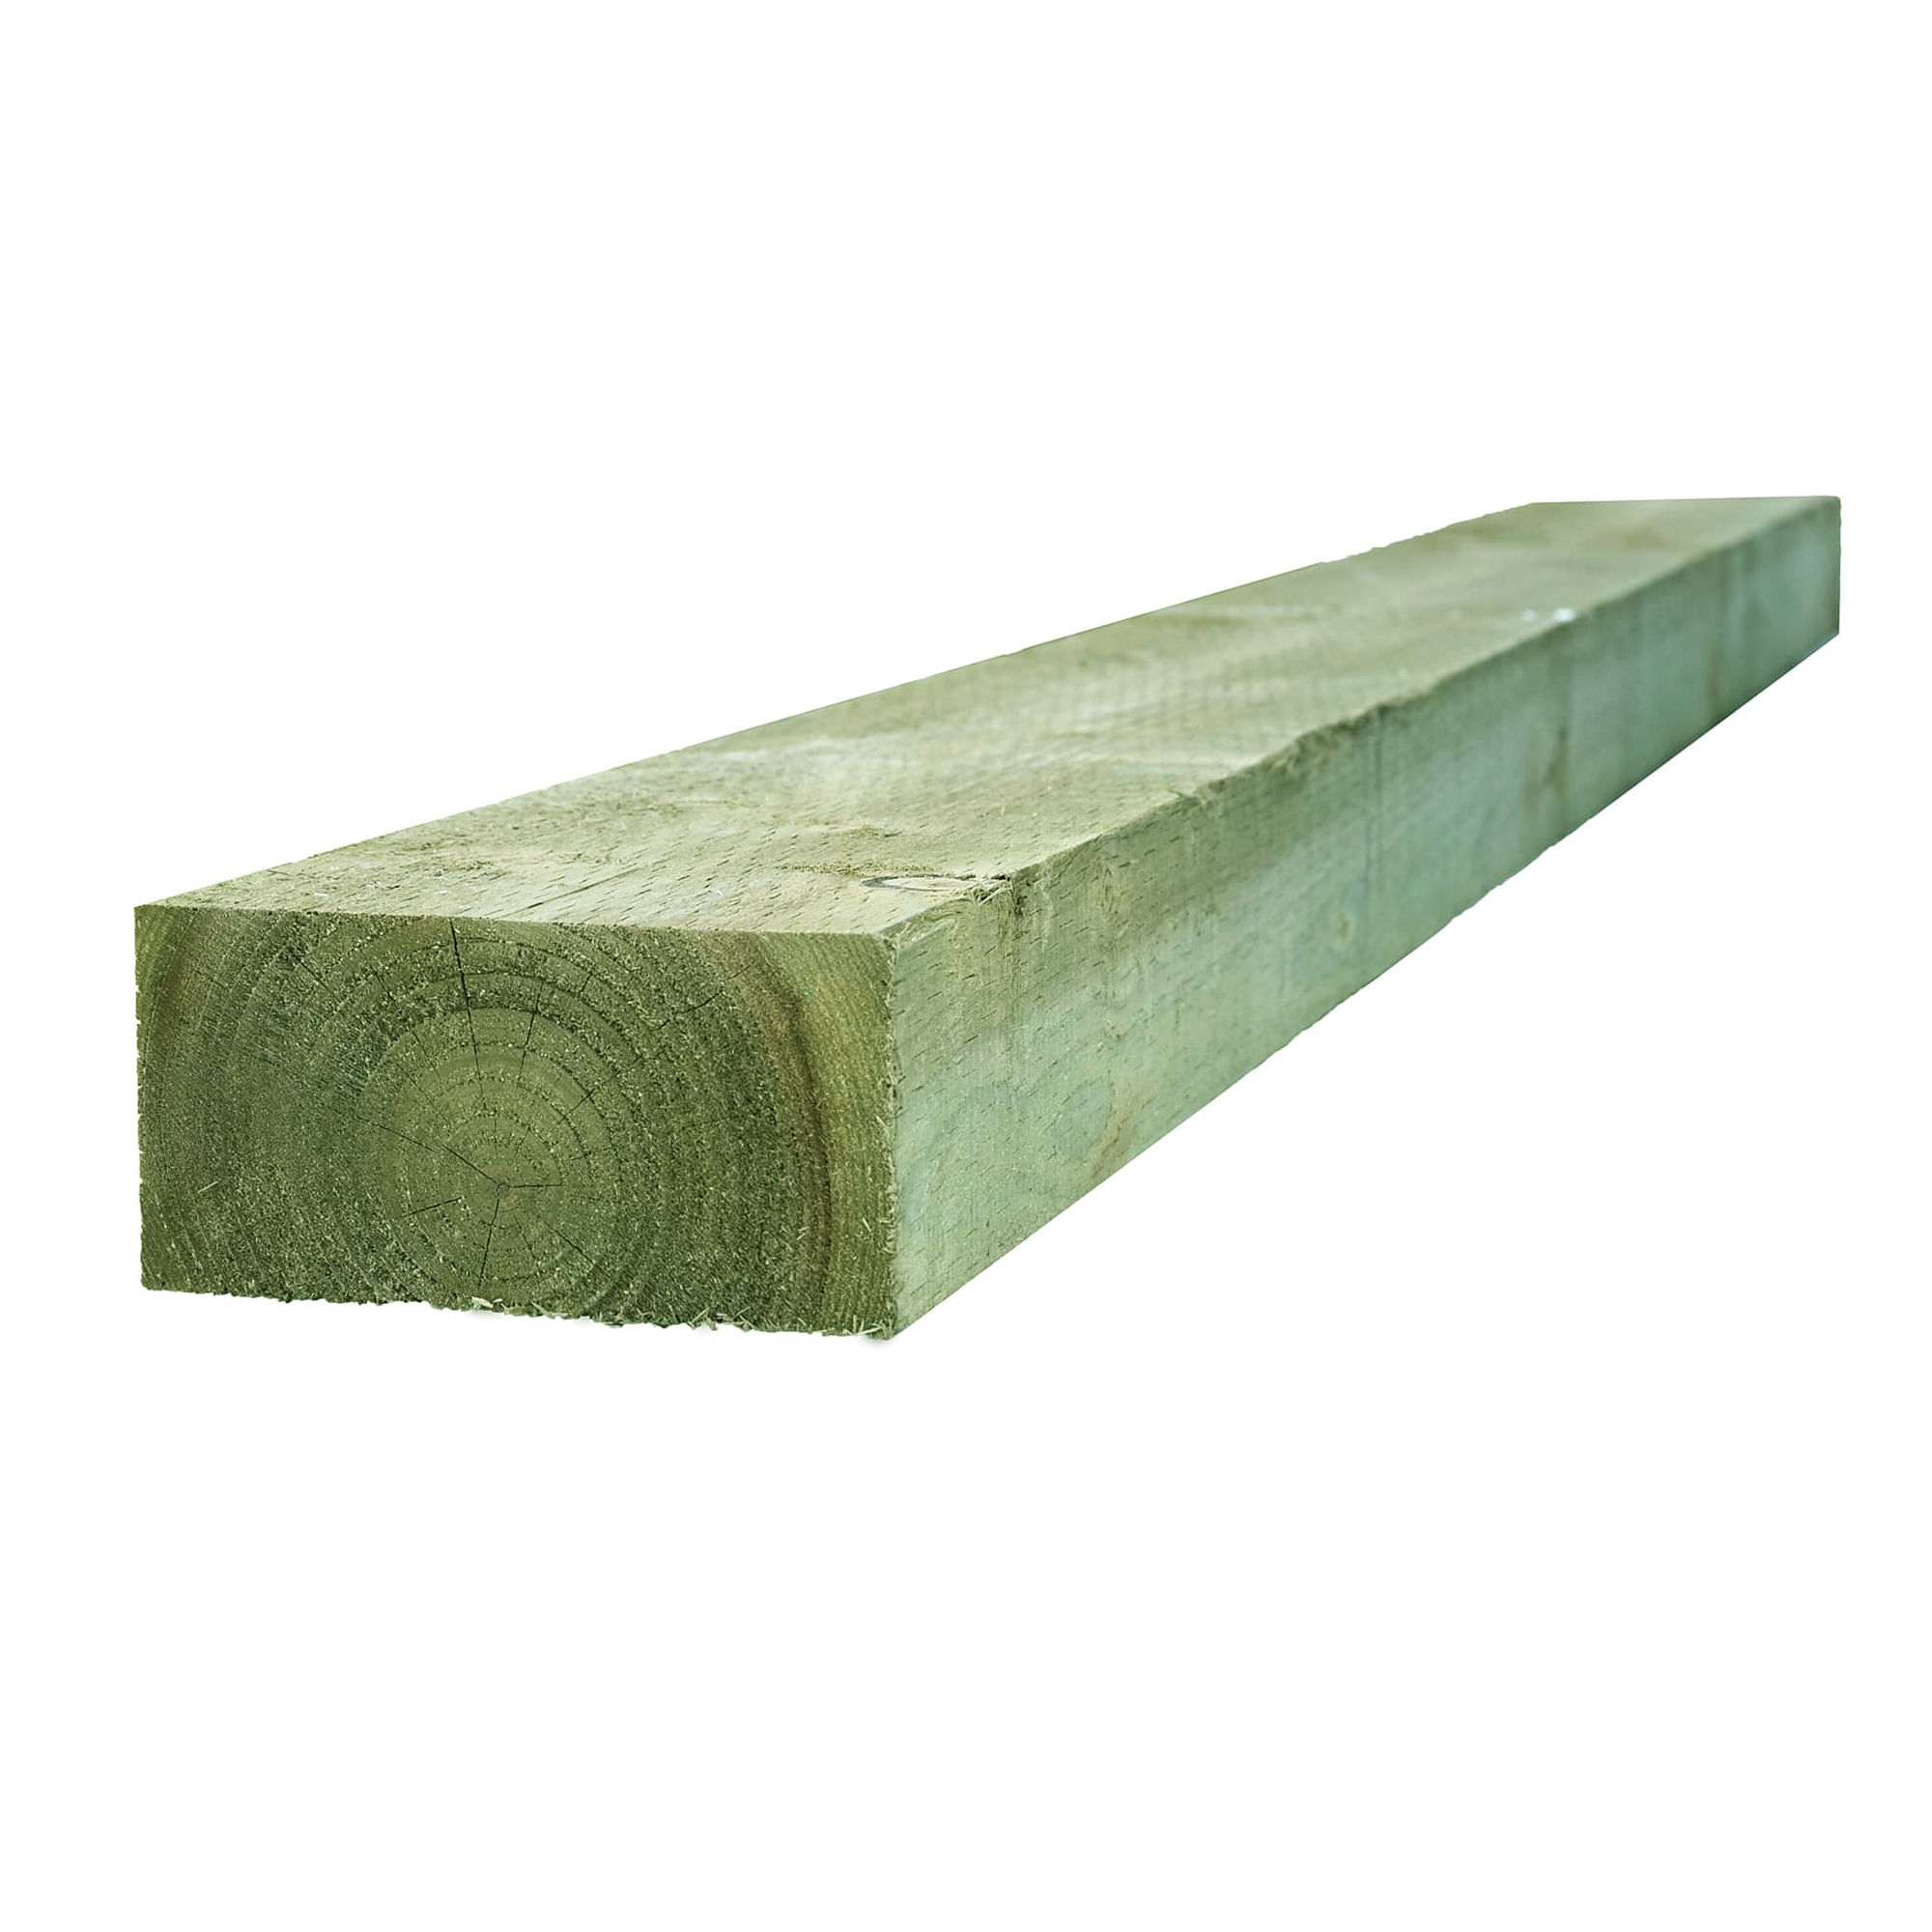 Garden Sleeper Treated Softwood Tanalised Green (Finished Size 95mm x 195mm)